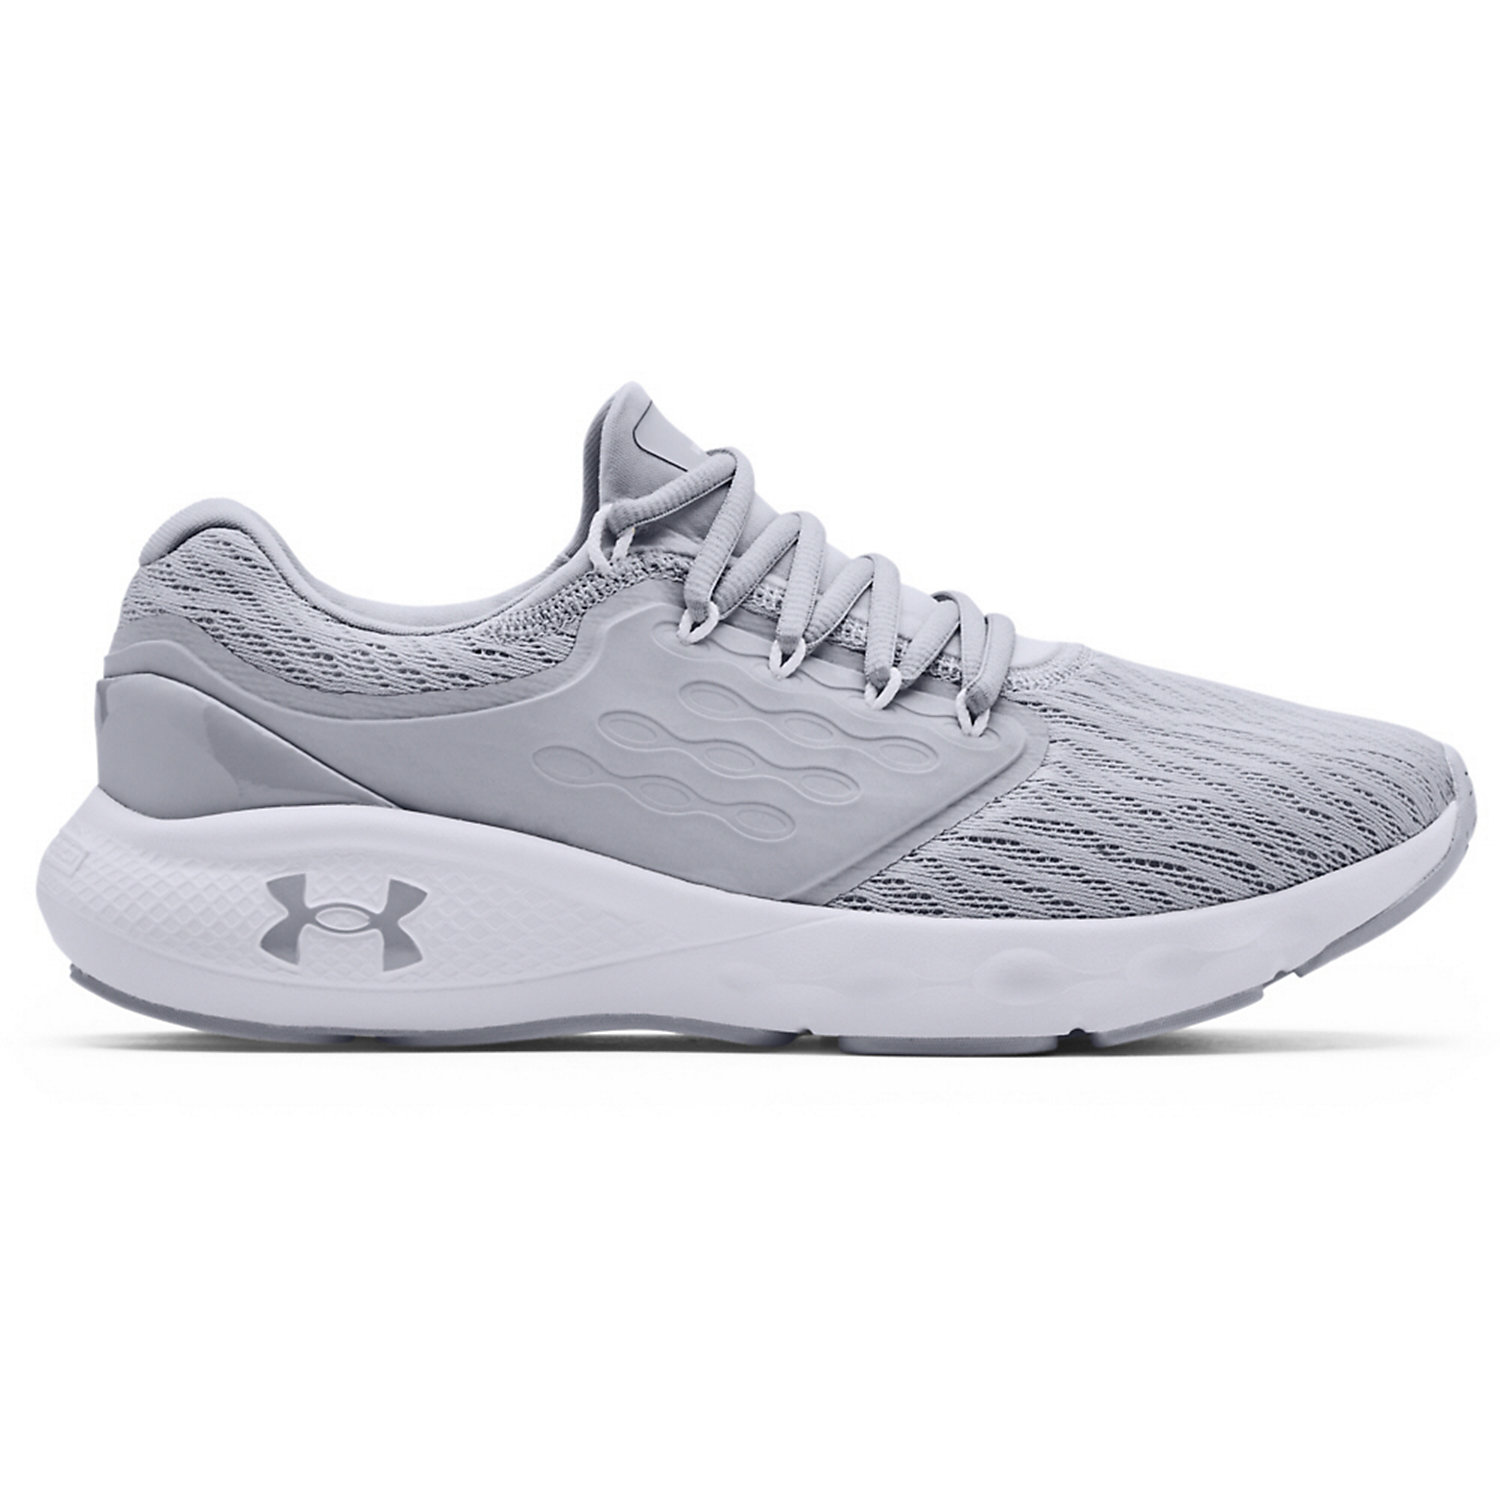 Under Armour Mens Charged Vantage Shoe